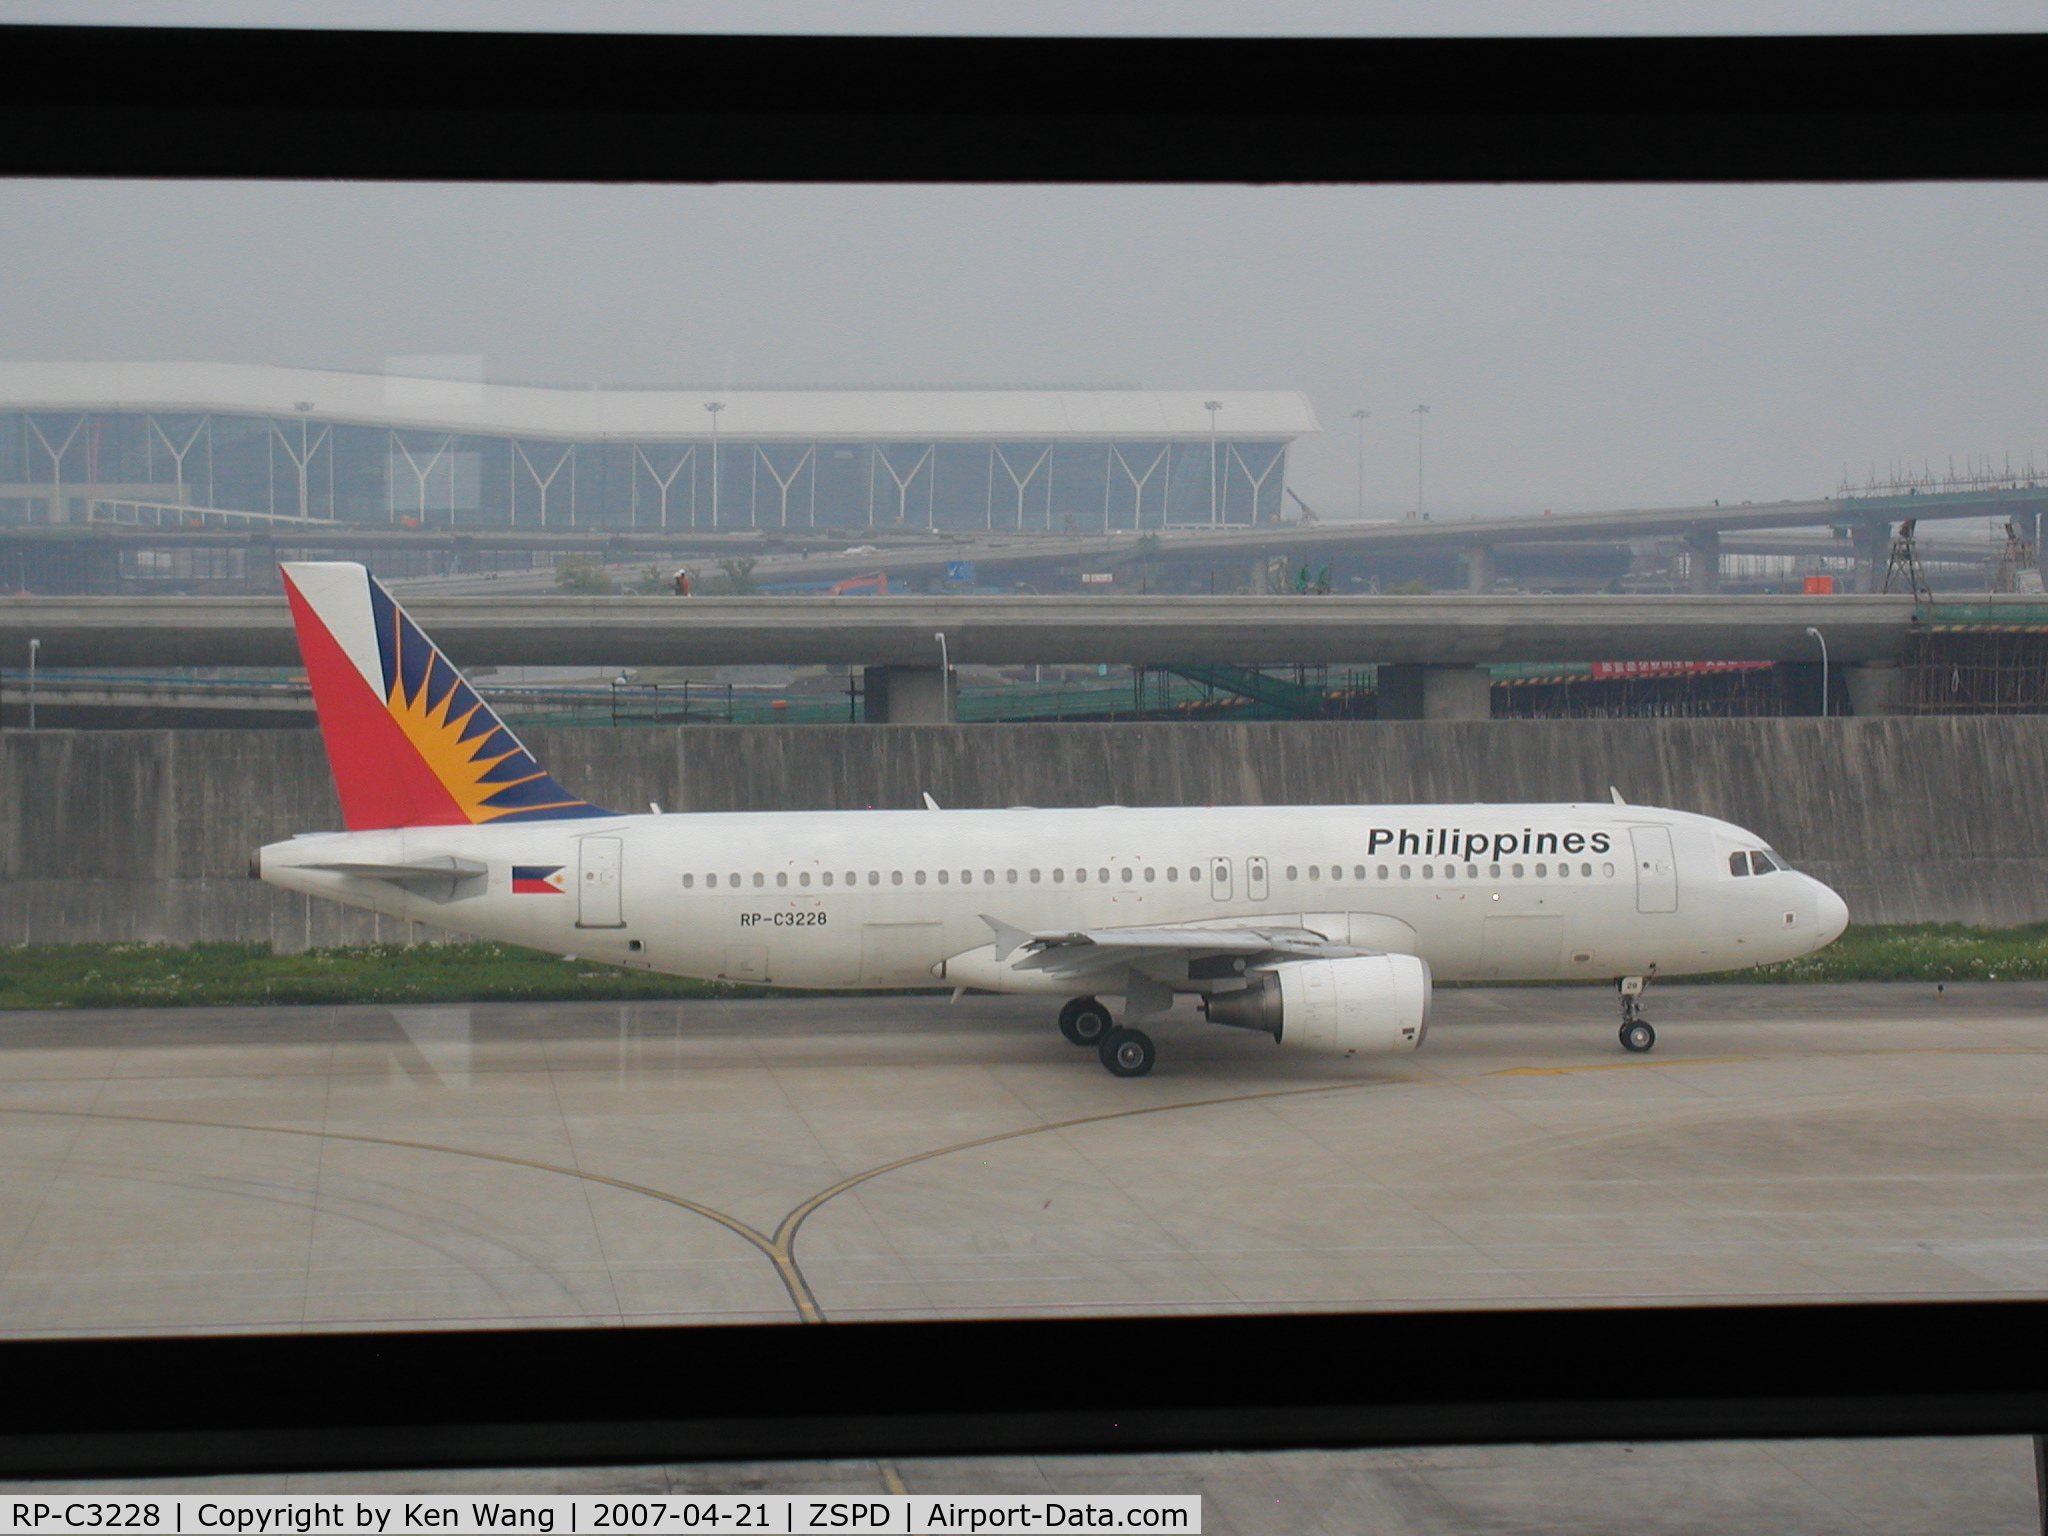 RP-C3228, 2004 Airbus A320-214 C/N 2162, Philippine Airlines Airbus A320 leaving gate